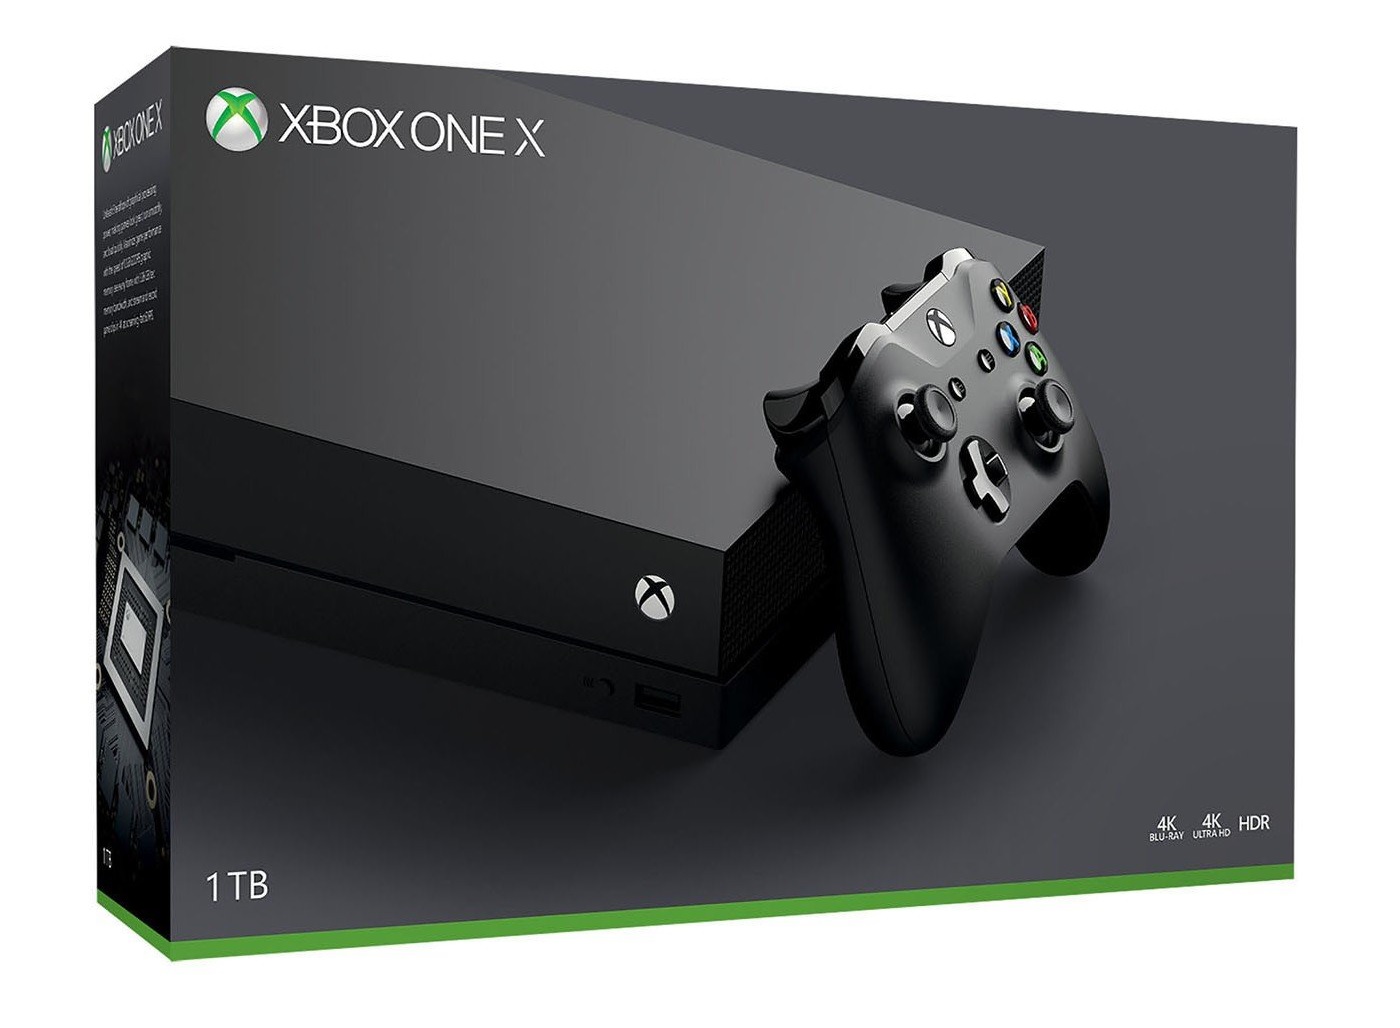 The Xbox One X arrived on the market with potential close to the current generation of video game consoles